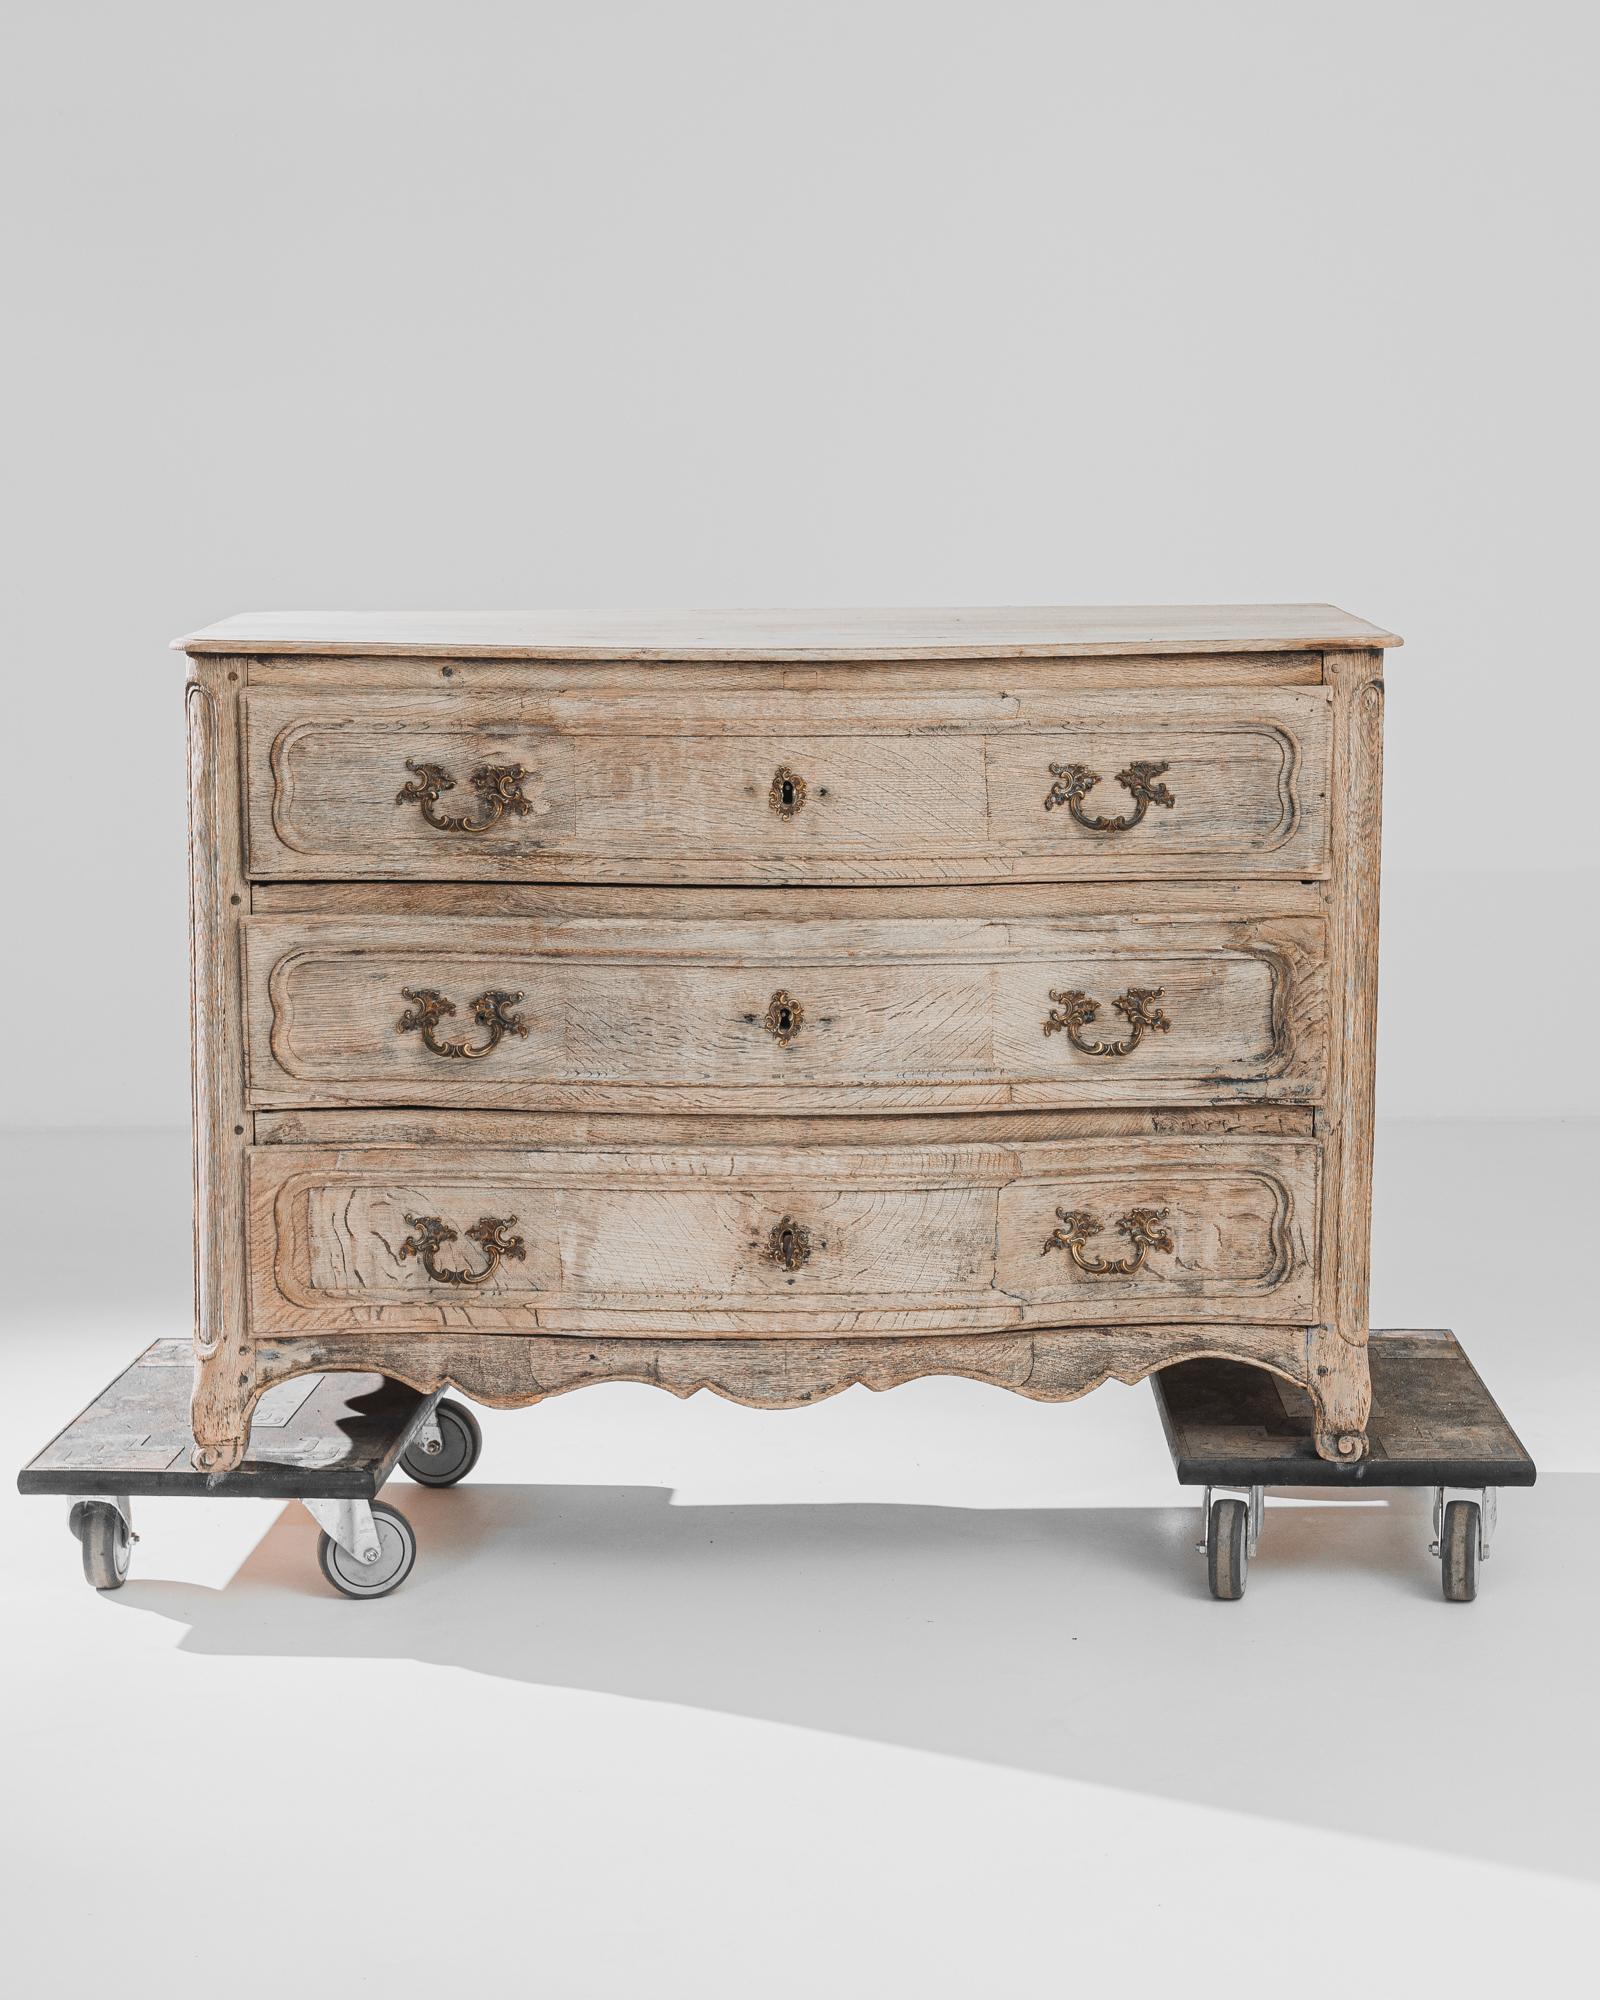 A bleached oak chest of drawers from France, produced circa 1850. This elegant antique buffet features three broad sliding drawers with brass pulls and escutcheons standing on four short feet with scroll details curling at the toes. The slight